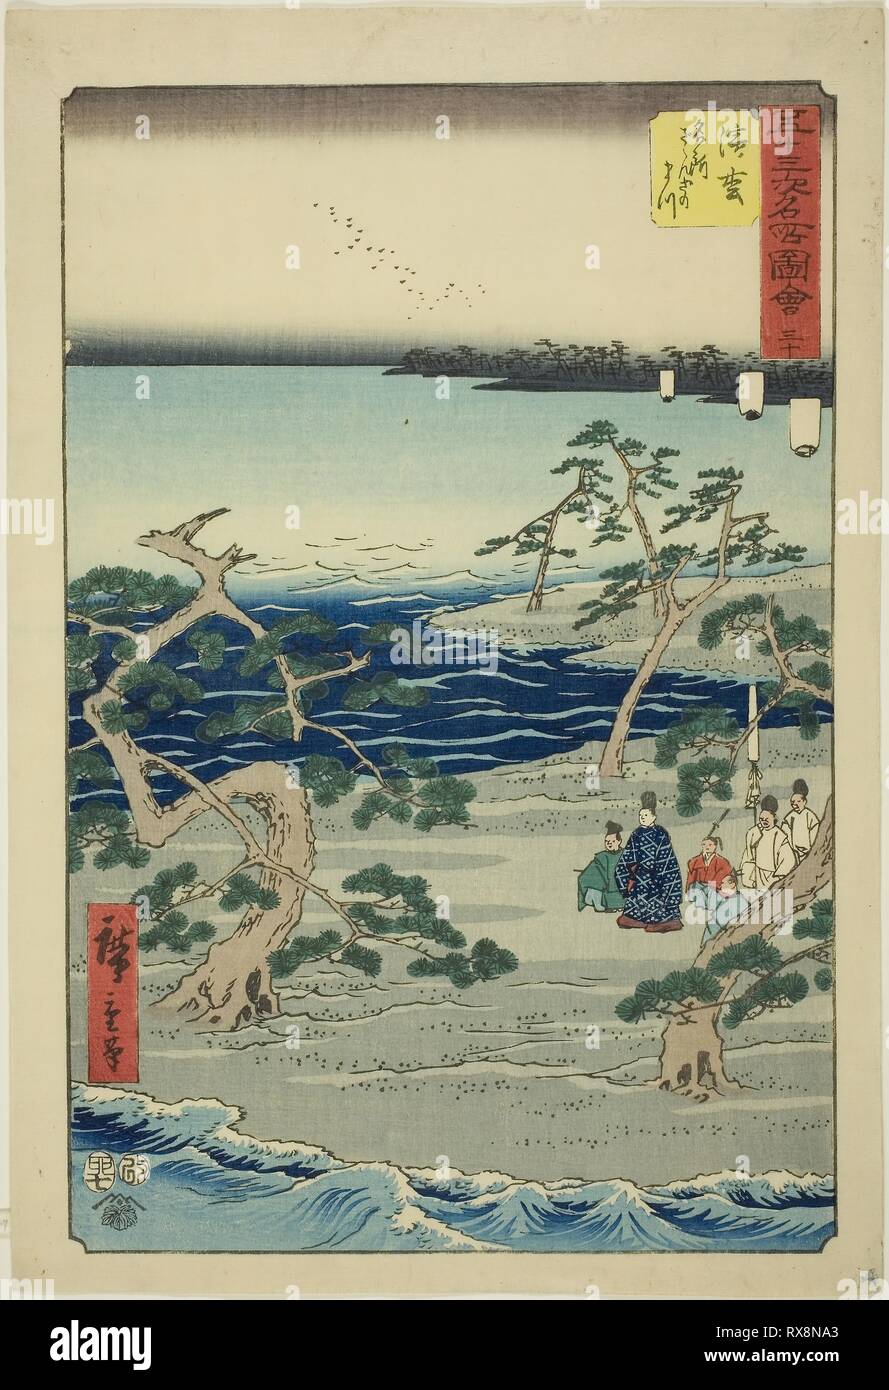 Hamamatsu: The Famous Murmuring Pines (Hamamatsu, meisho zazanza no matsu), no. 30 from the series 'Famous Sights of the Fifty-three Stations (Gojusan tsugi meisho zue),' also known as the Vertical Tokaido. Utagawa Hiroshige ?? ??; Japanese, 1797-1858. Date: 1855. Dimensions: 40 x 25.7 cm (15 3/4 x 10 1/8 in.). Color woodblock print; oban. Origin: Japan. Museum: The Chicago Art Institute. Stock Photo